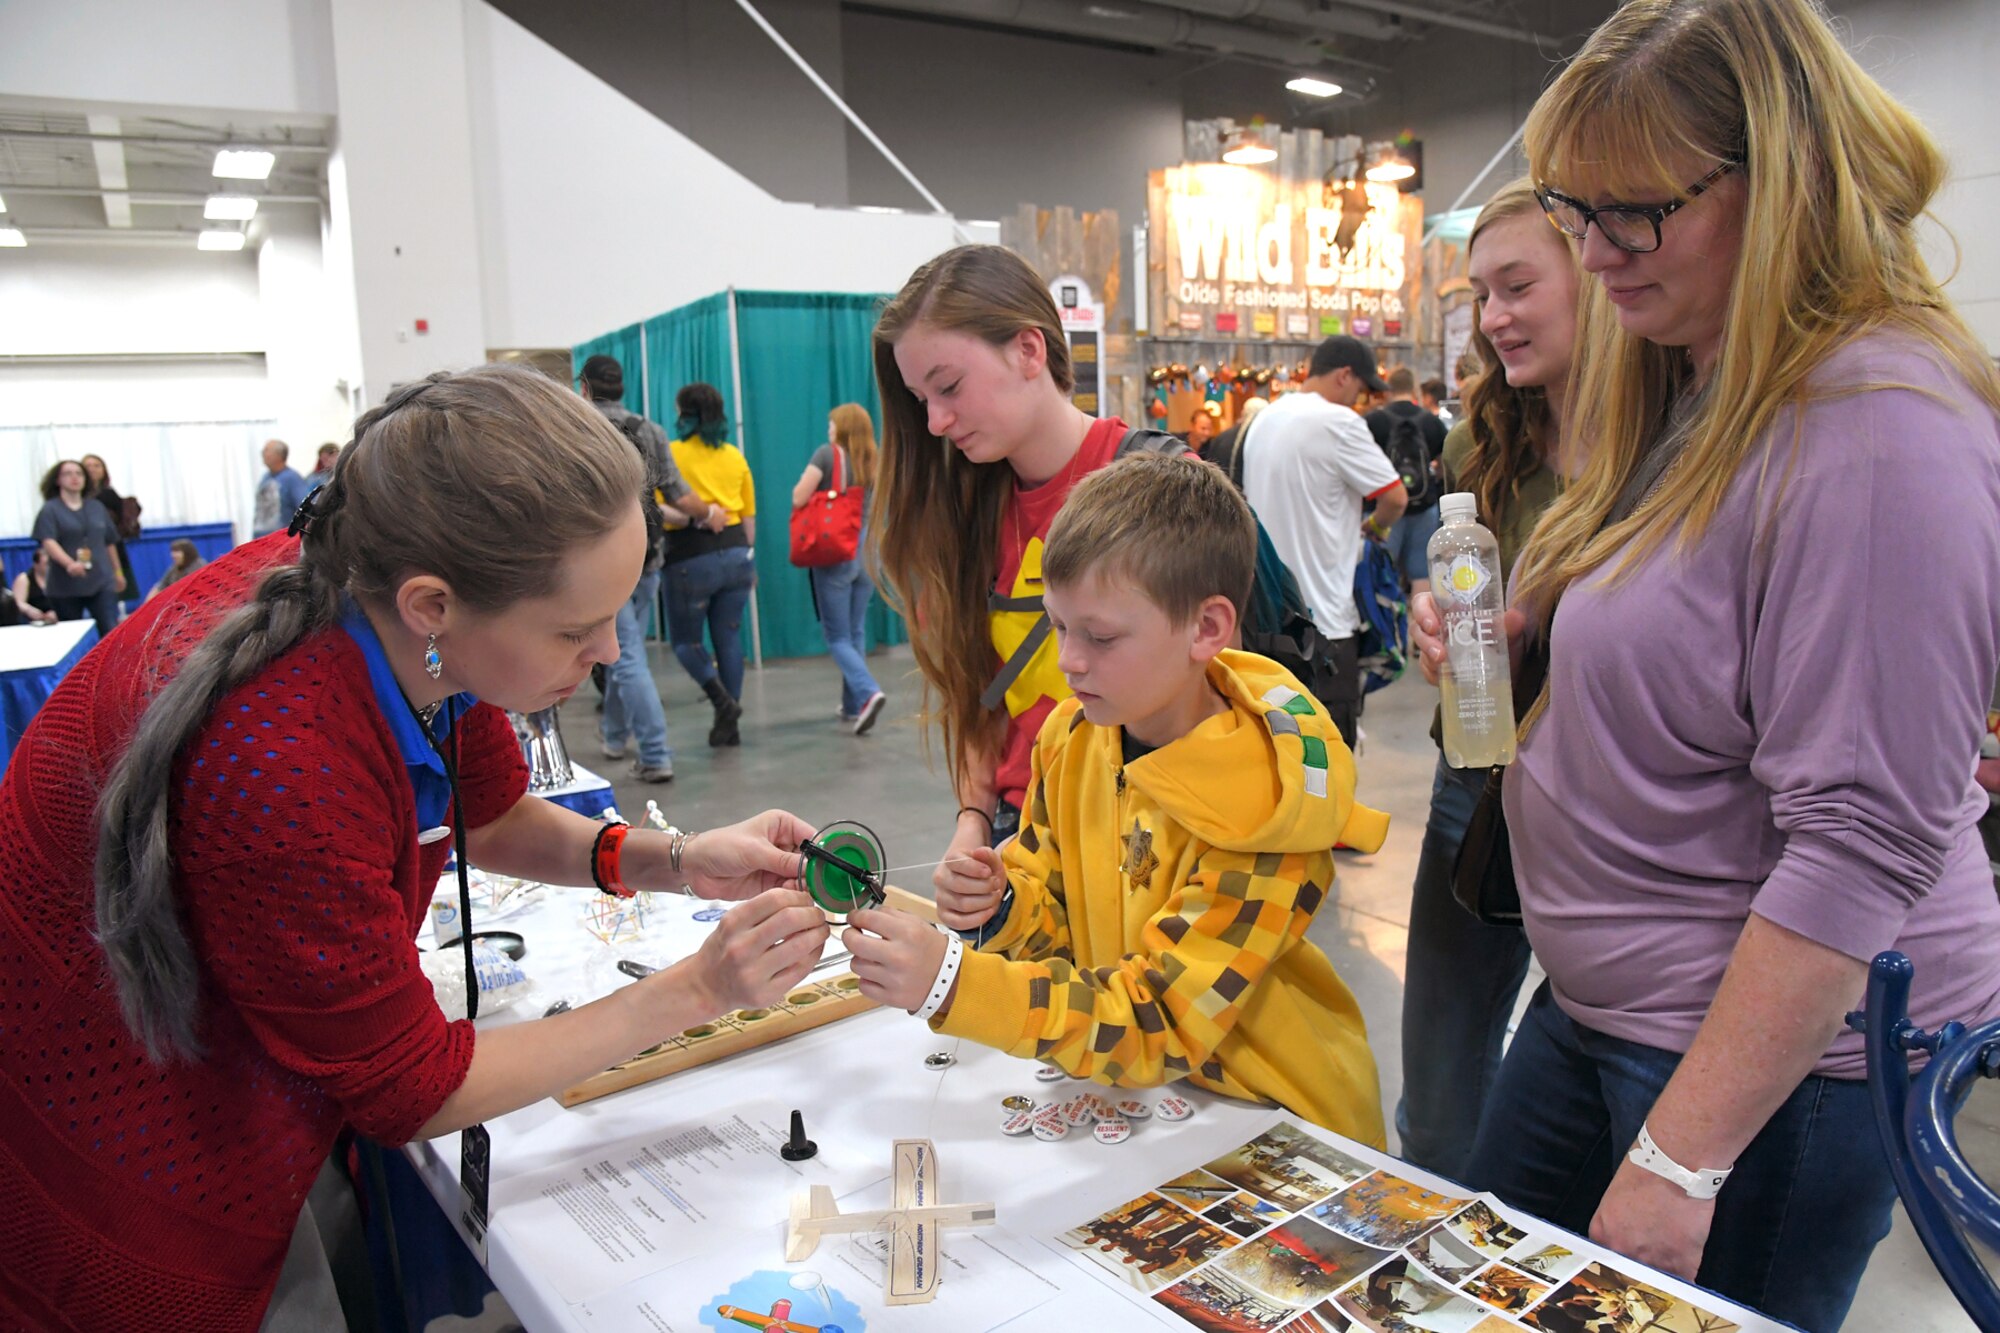 FanX visitors try out toys designed to demonstrate scientific principles and talk with Rachael Beal, 309 Software Maintenance Wing, volunteer at the HAFB STEM Outreach booth, Sept. 7, Salt Lake City.